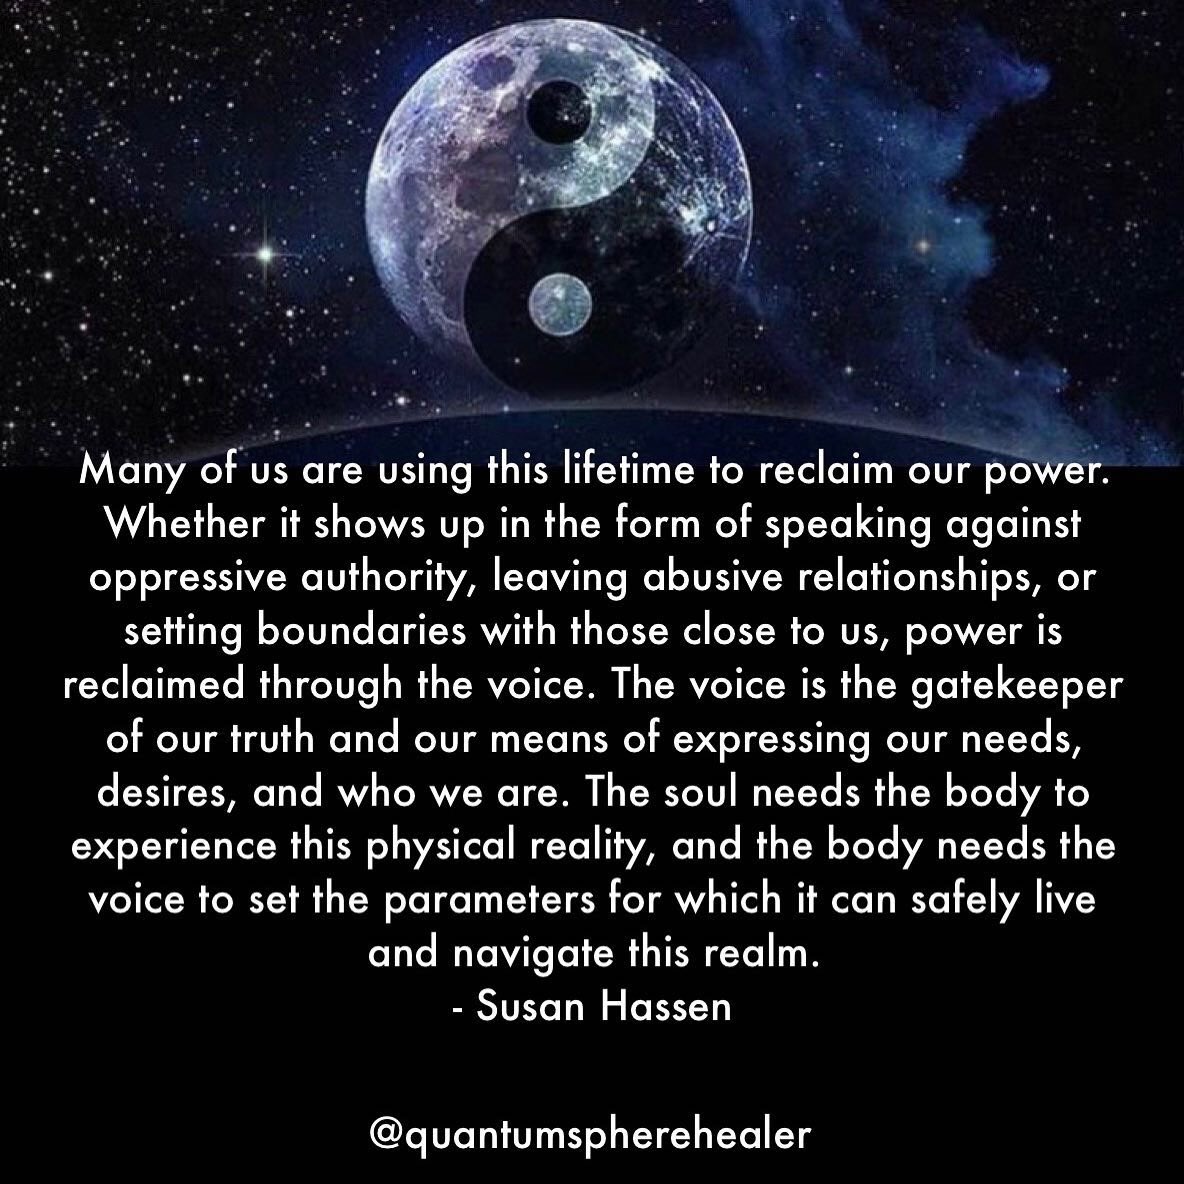 Whether it shows up in the form of speaking against oppressive authority, leaving abusive relationships